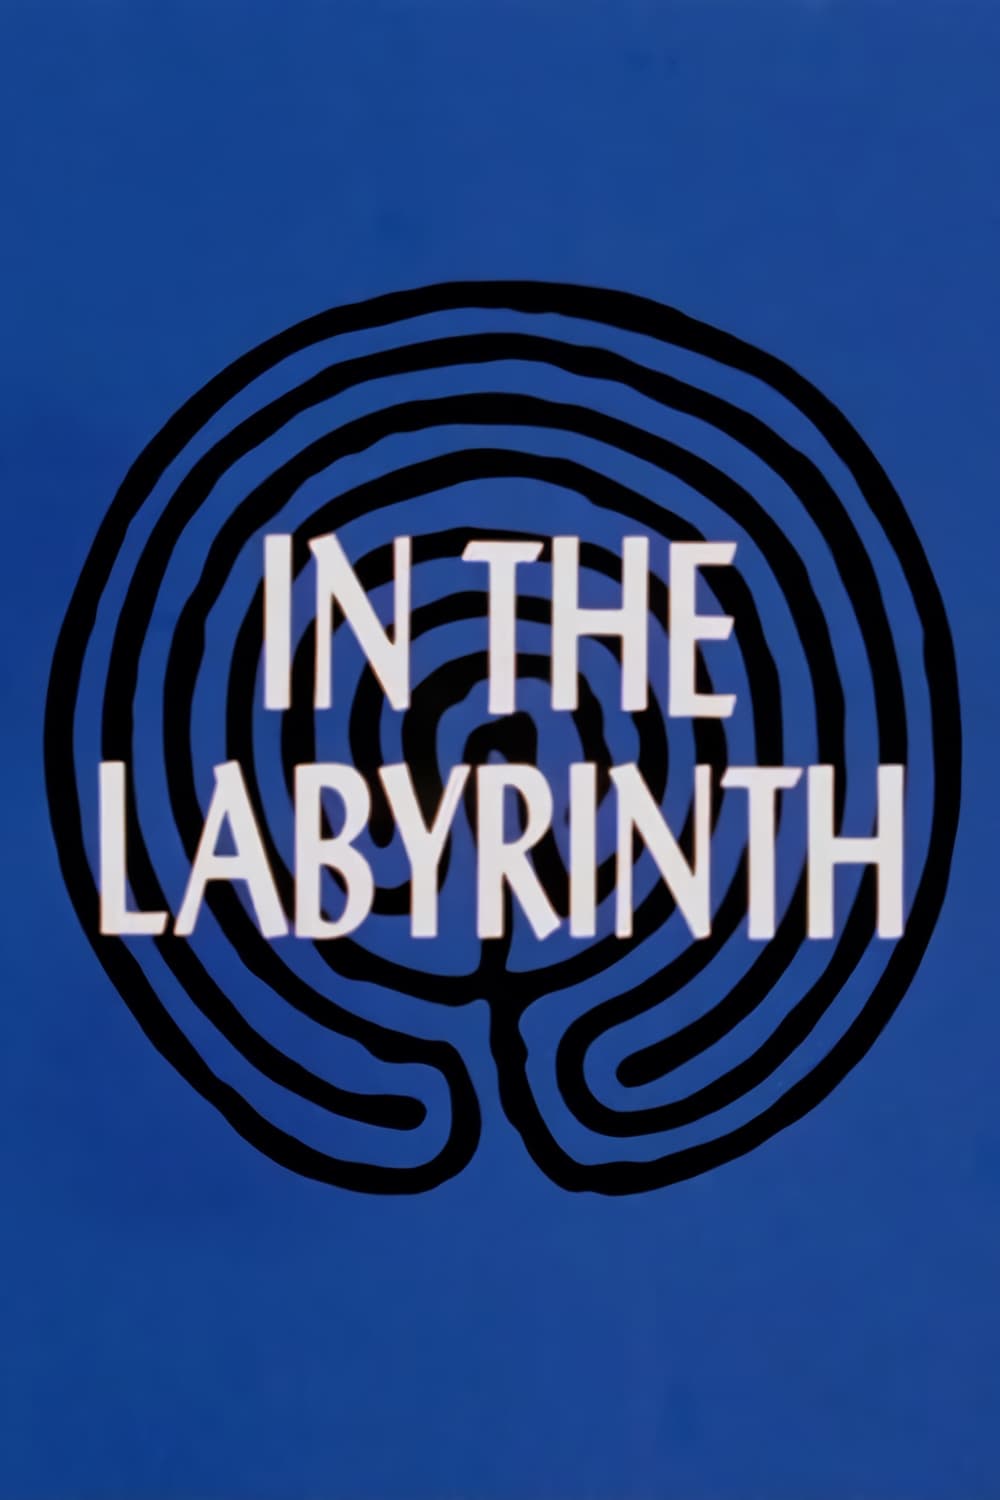 In the Labyrinth